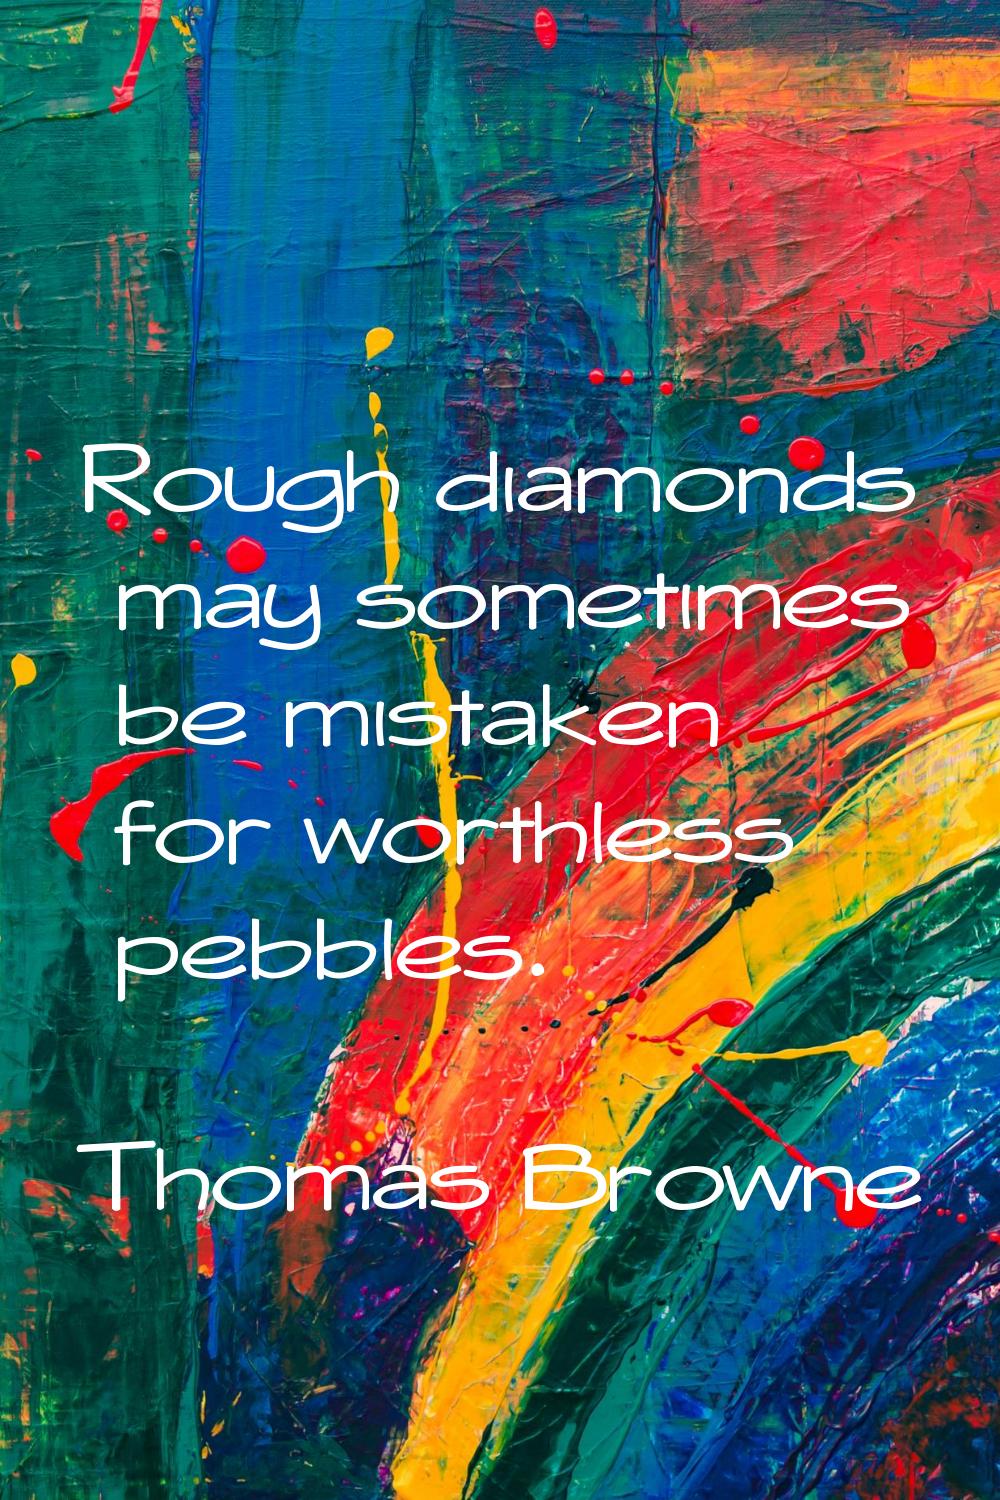 Rough diamonds may sometimes be mistaken for worthless pebbles.